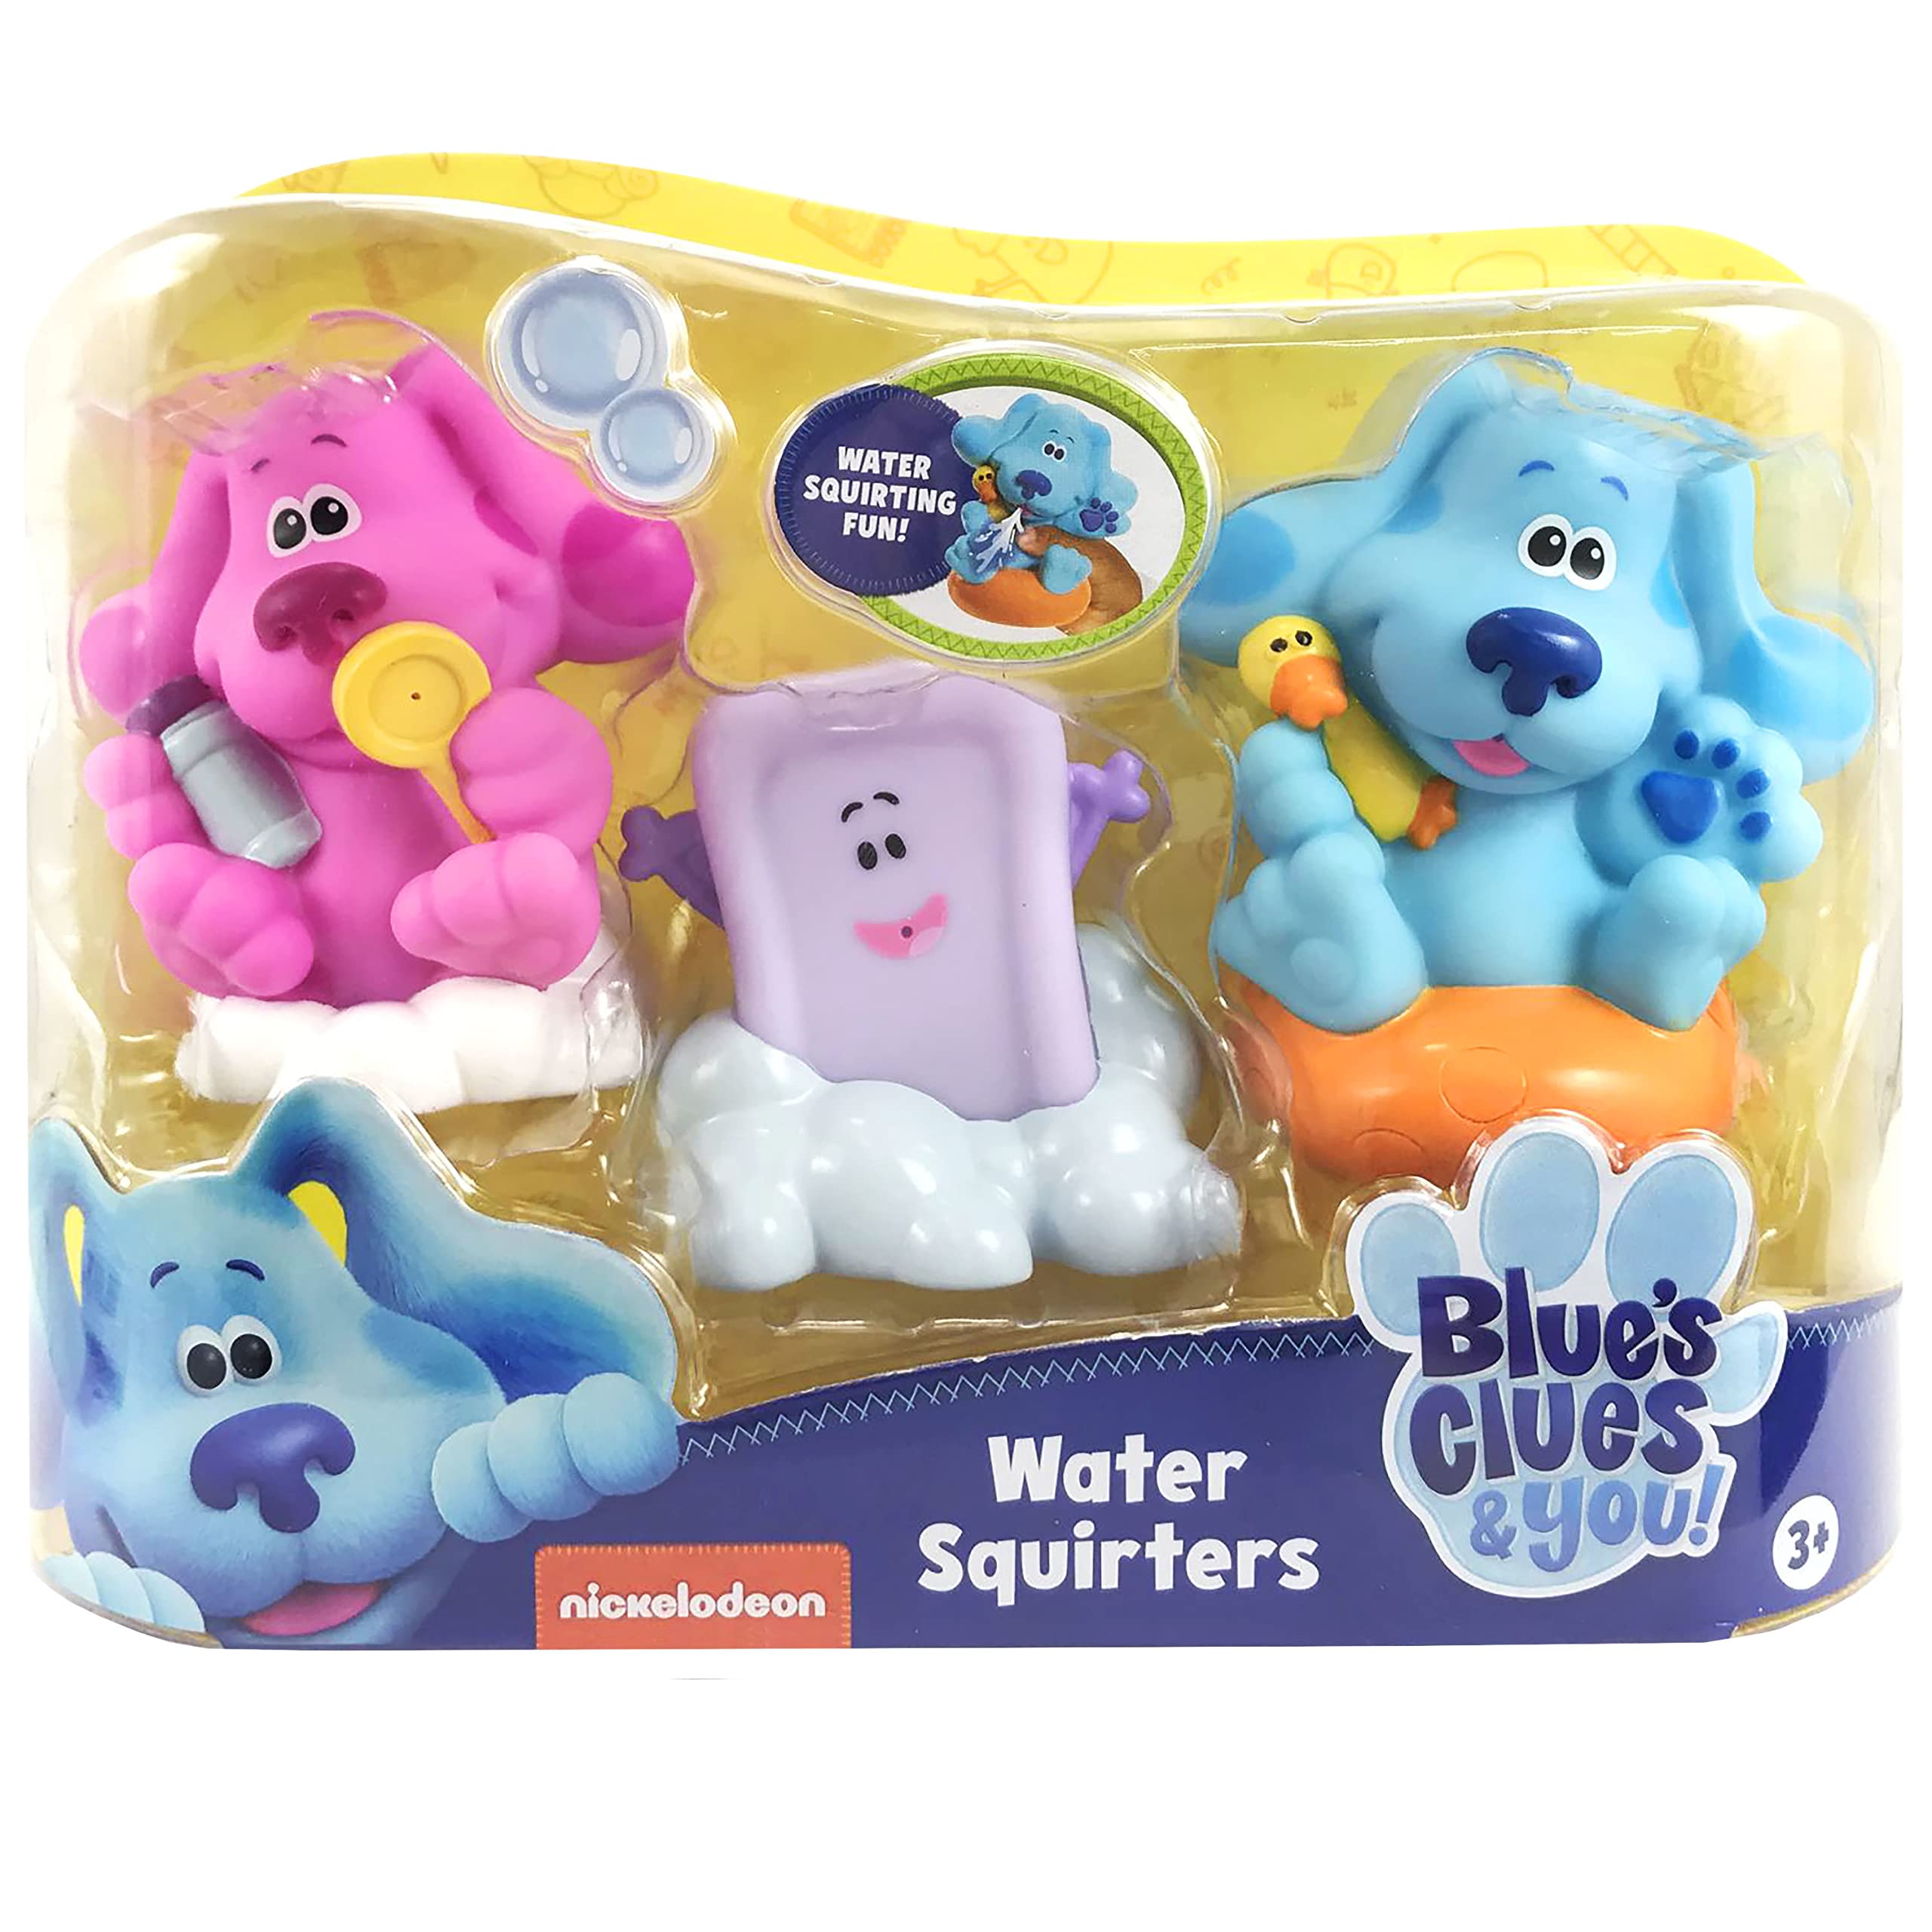 Blue's Clues & You! Deluxe Bath Toy Set, Includes Blue, Magenta, and Slippery Soap Water Toys, Amazon Exclusive, by Just Play